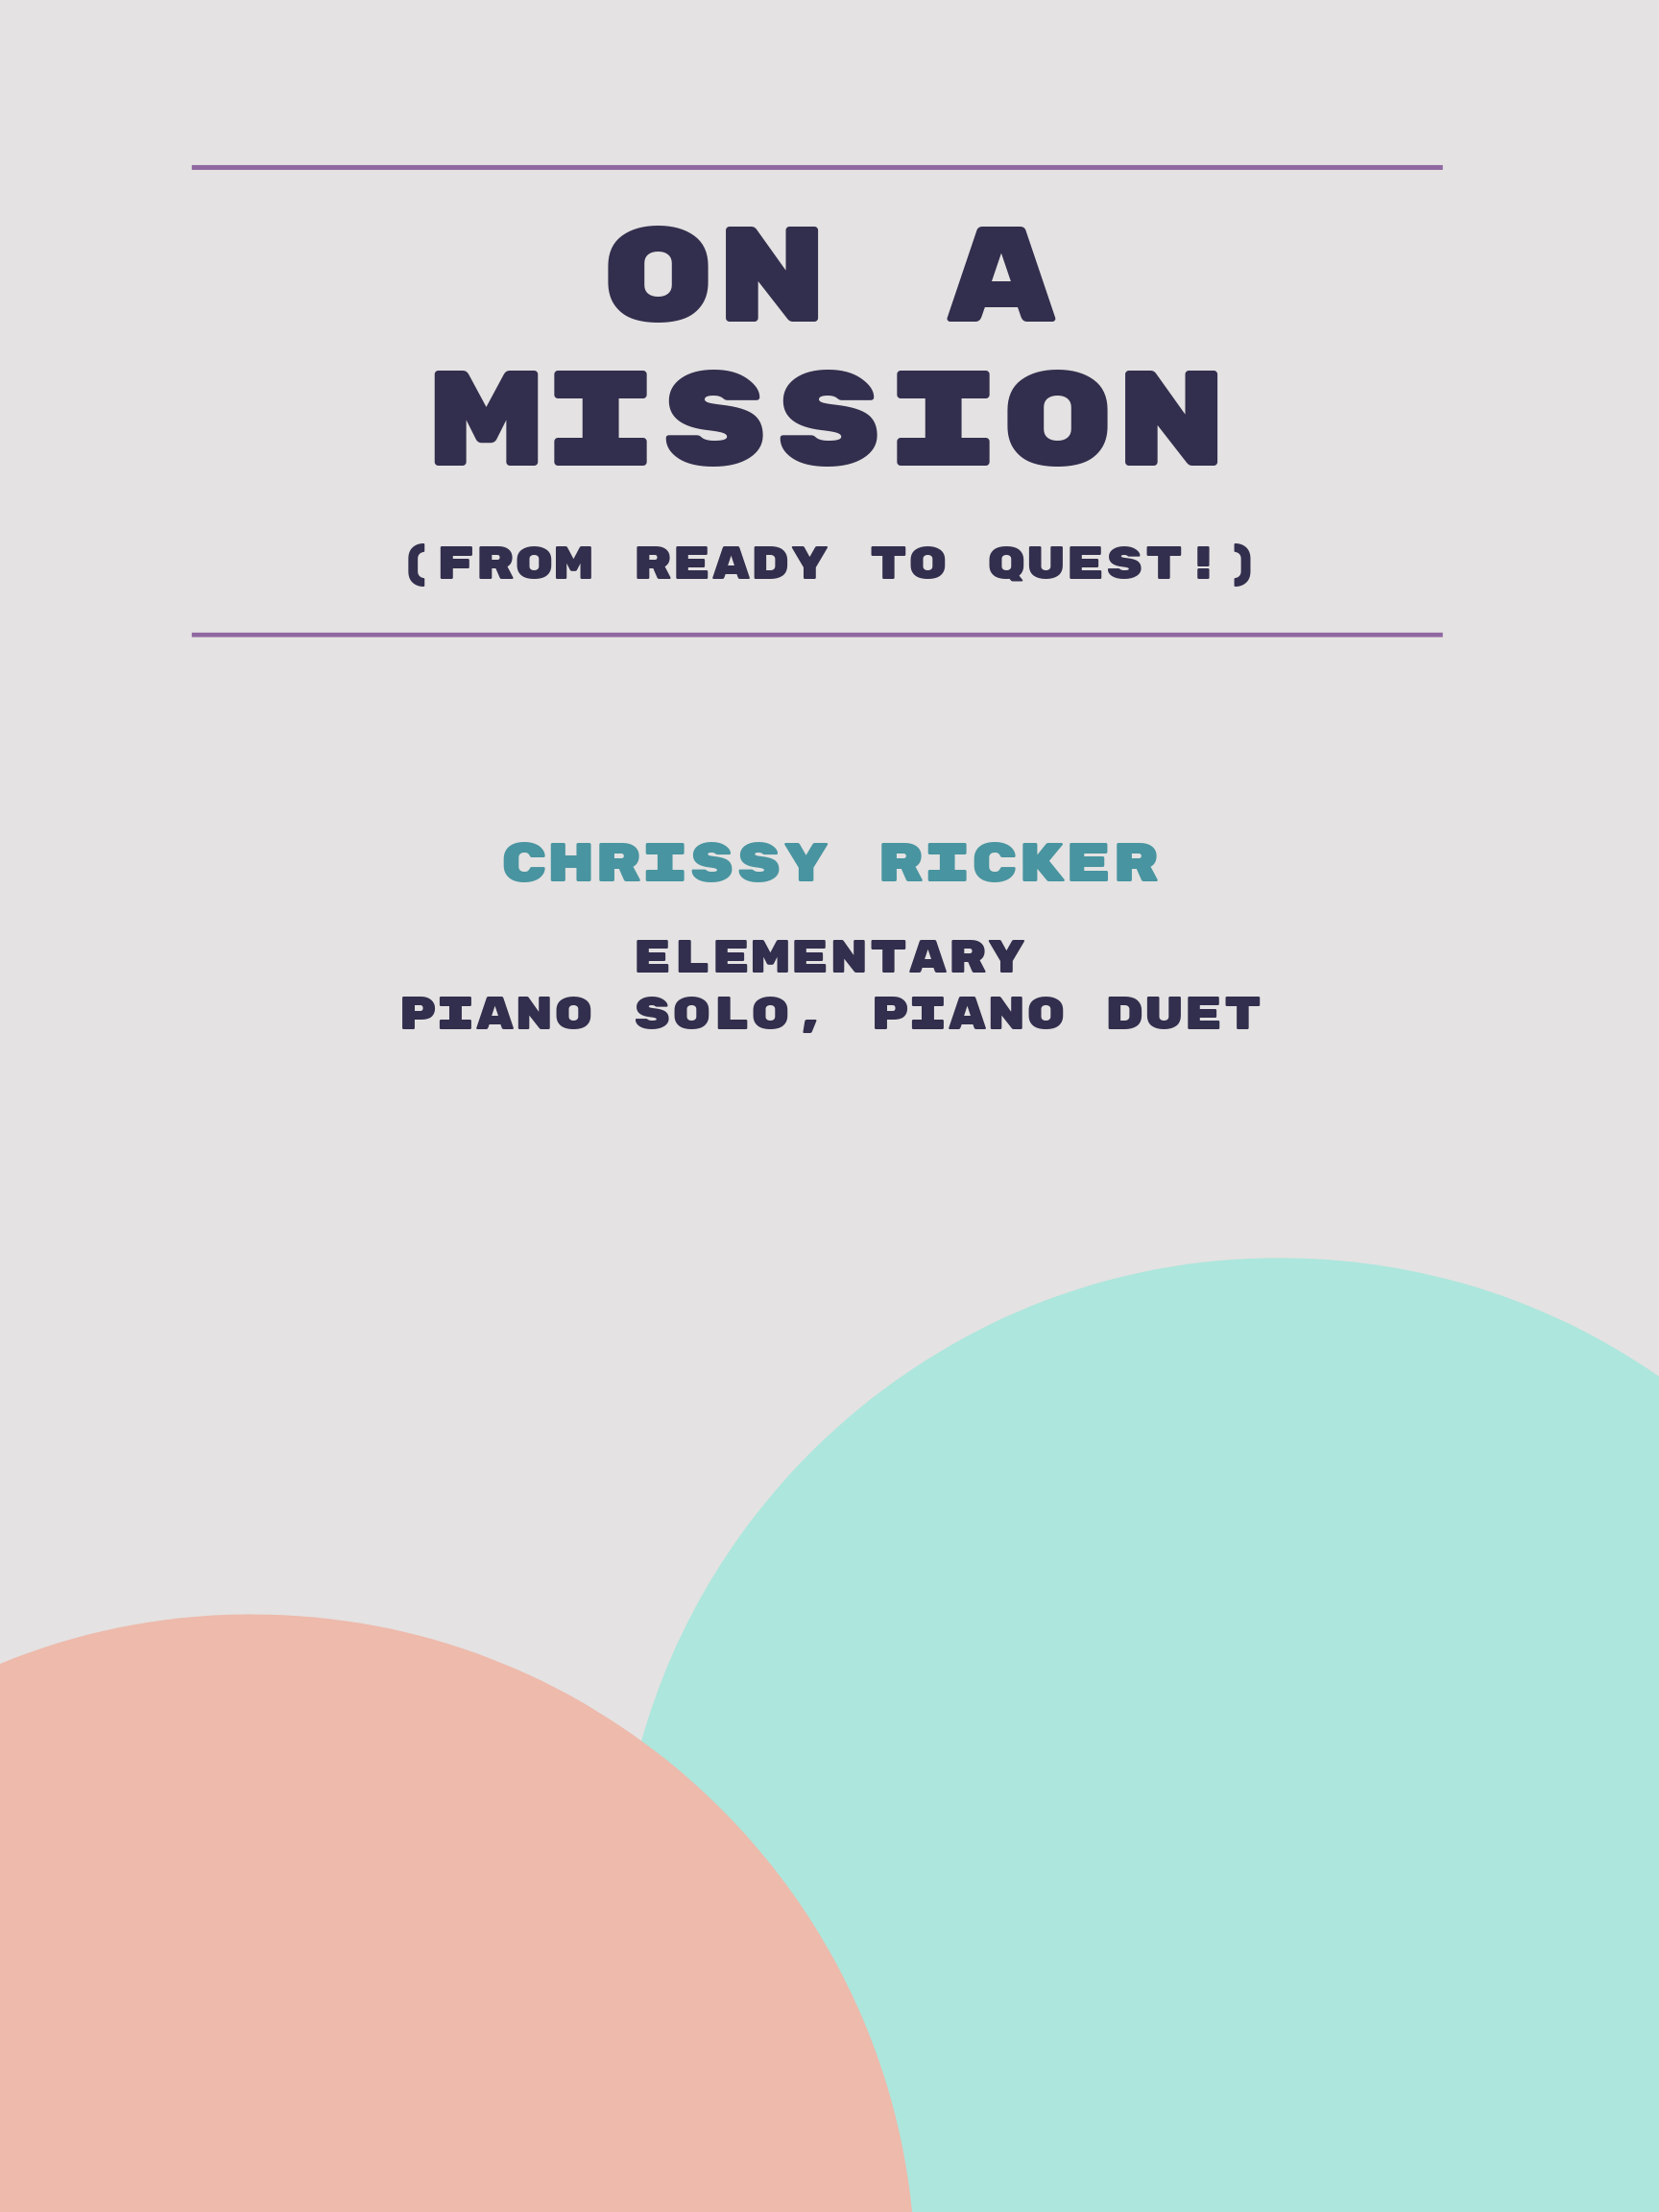 On a Mission by Chrissy Ricker